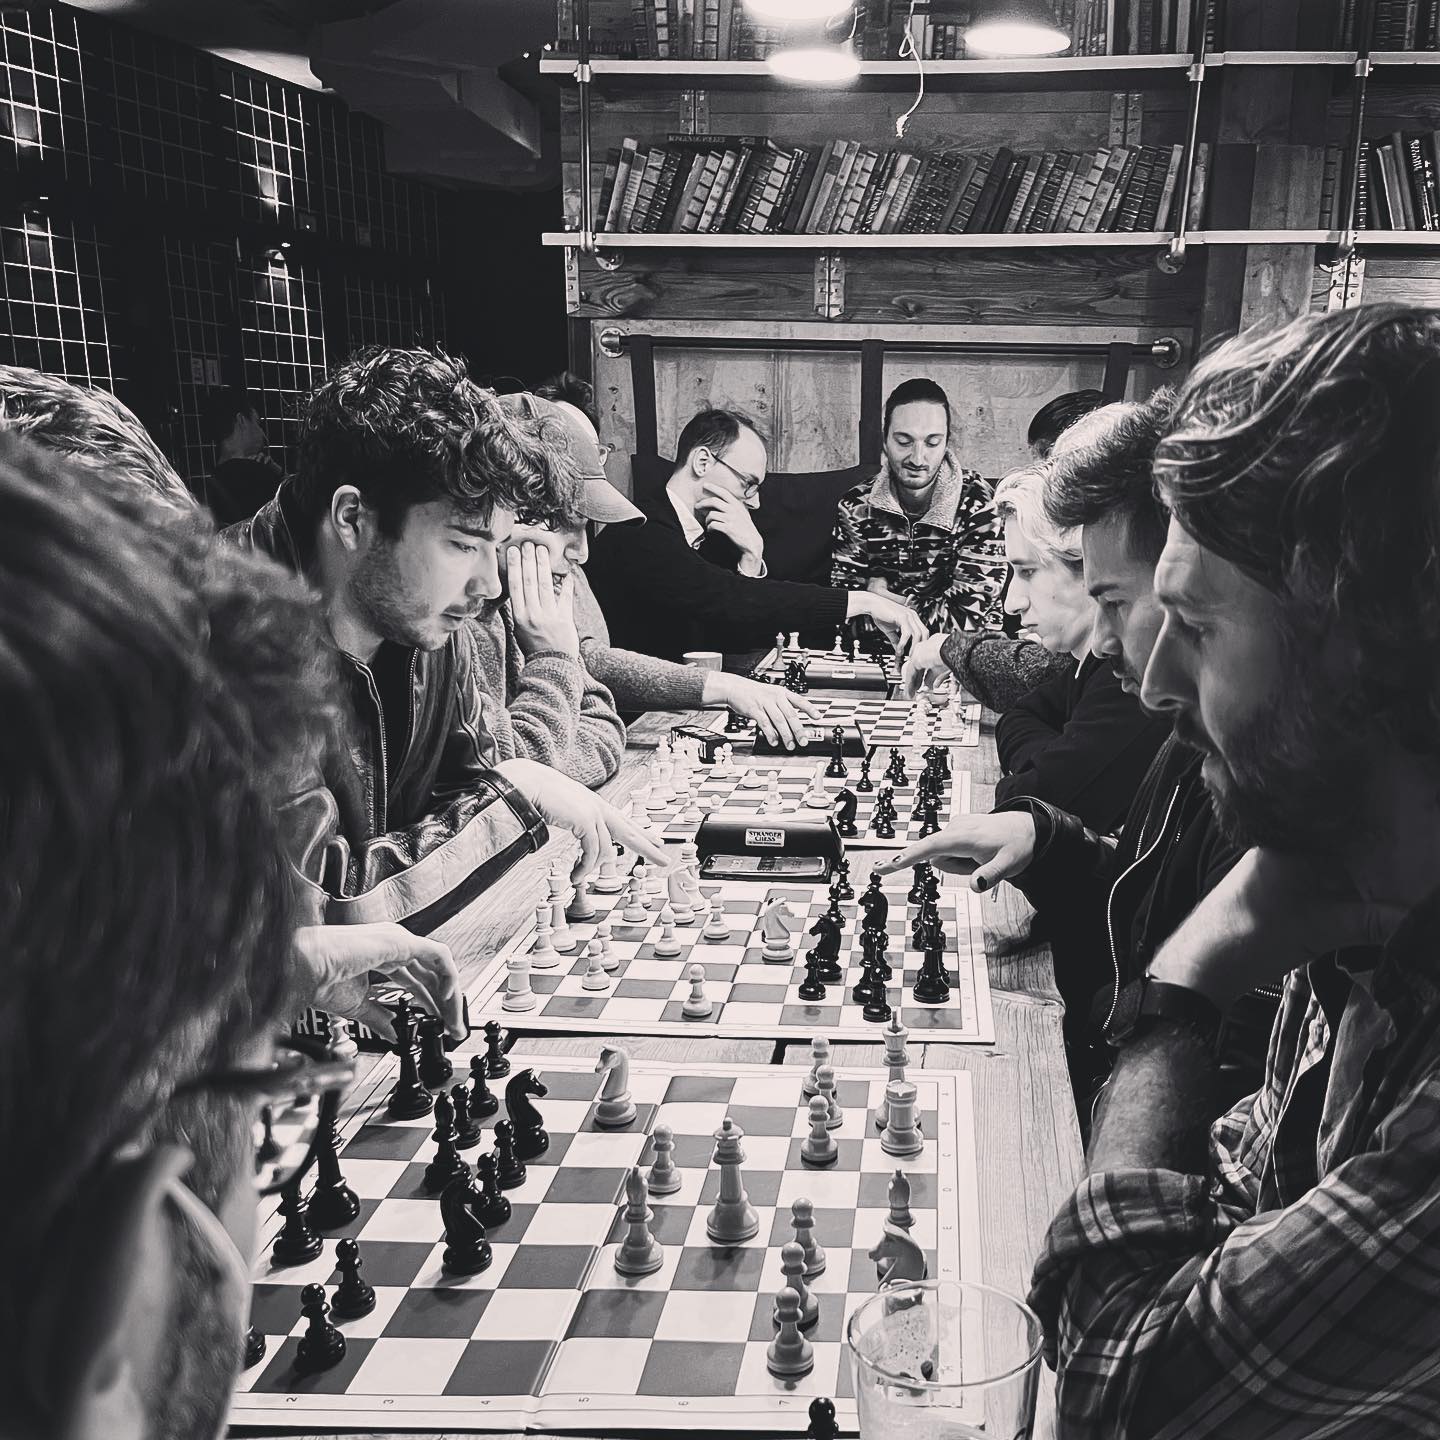 A group of people playing chess on a long table